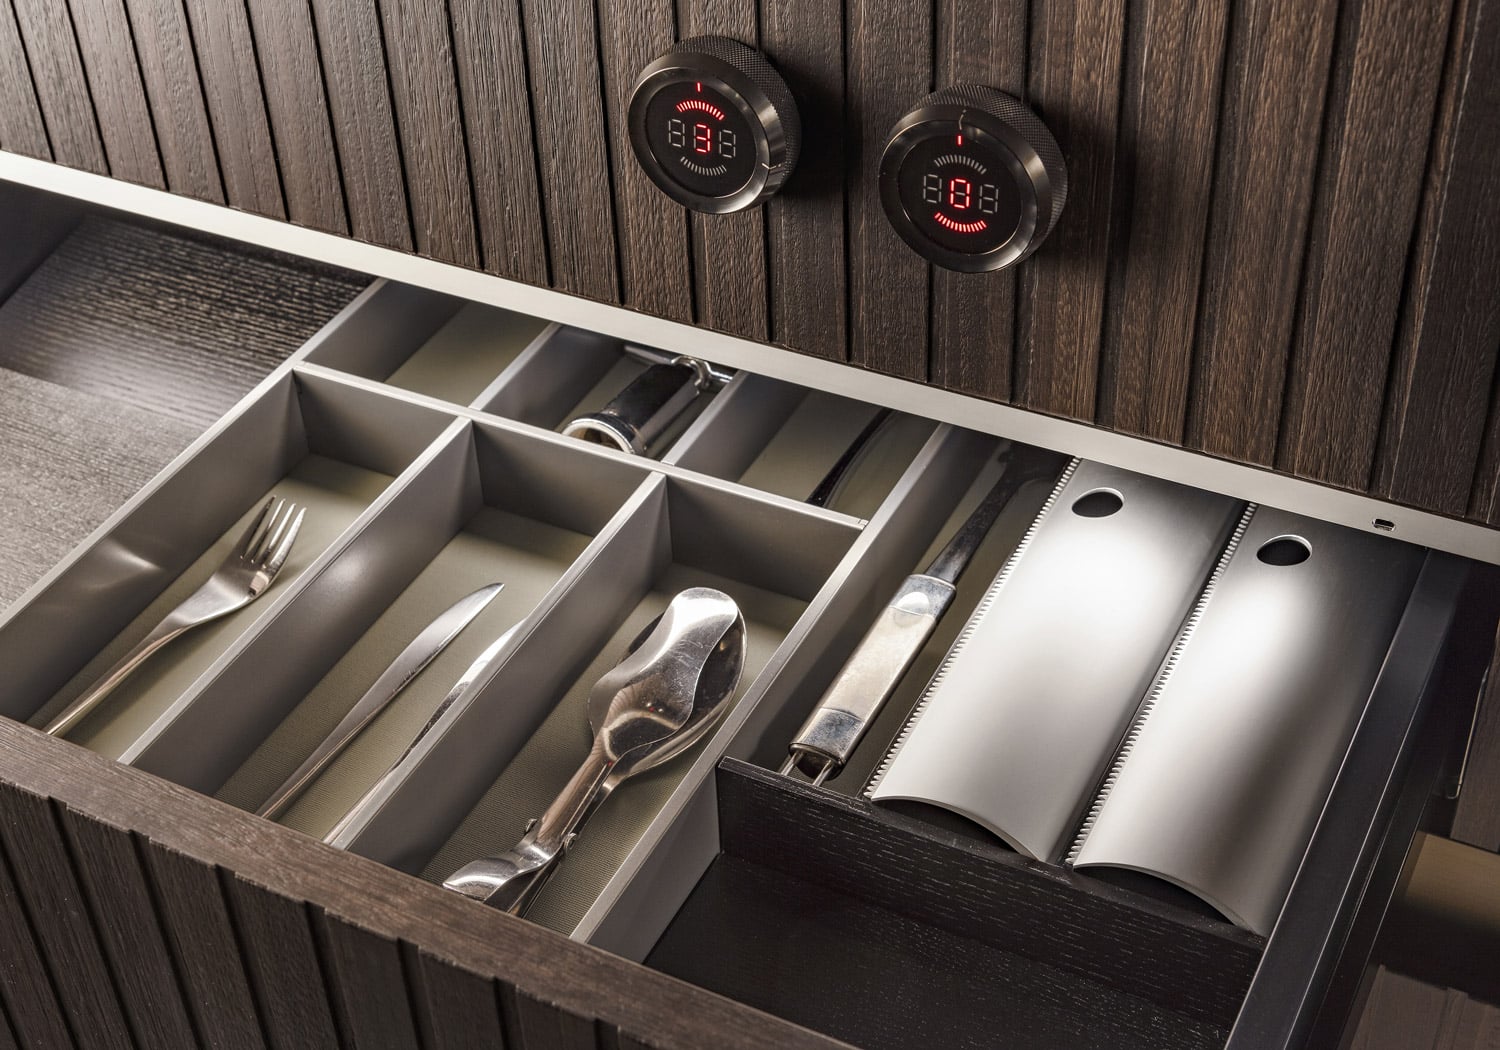 Custom inserts in aluminum organize the storage space inside drawers and deep baskets. 